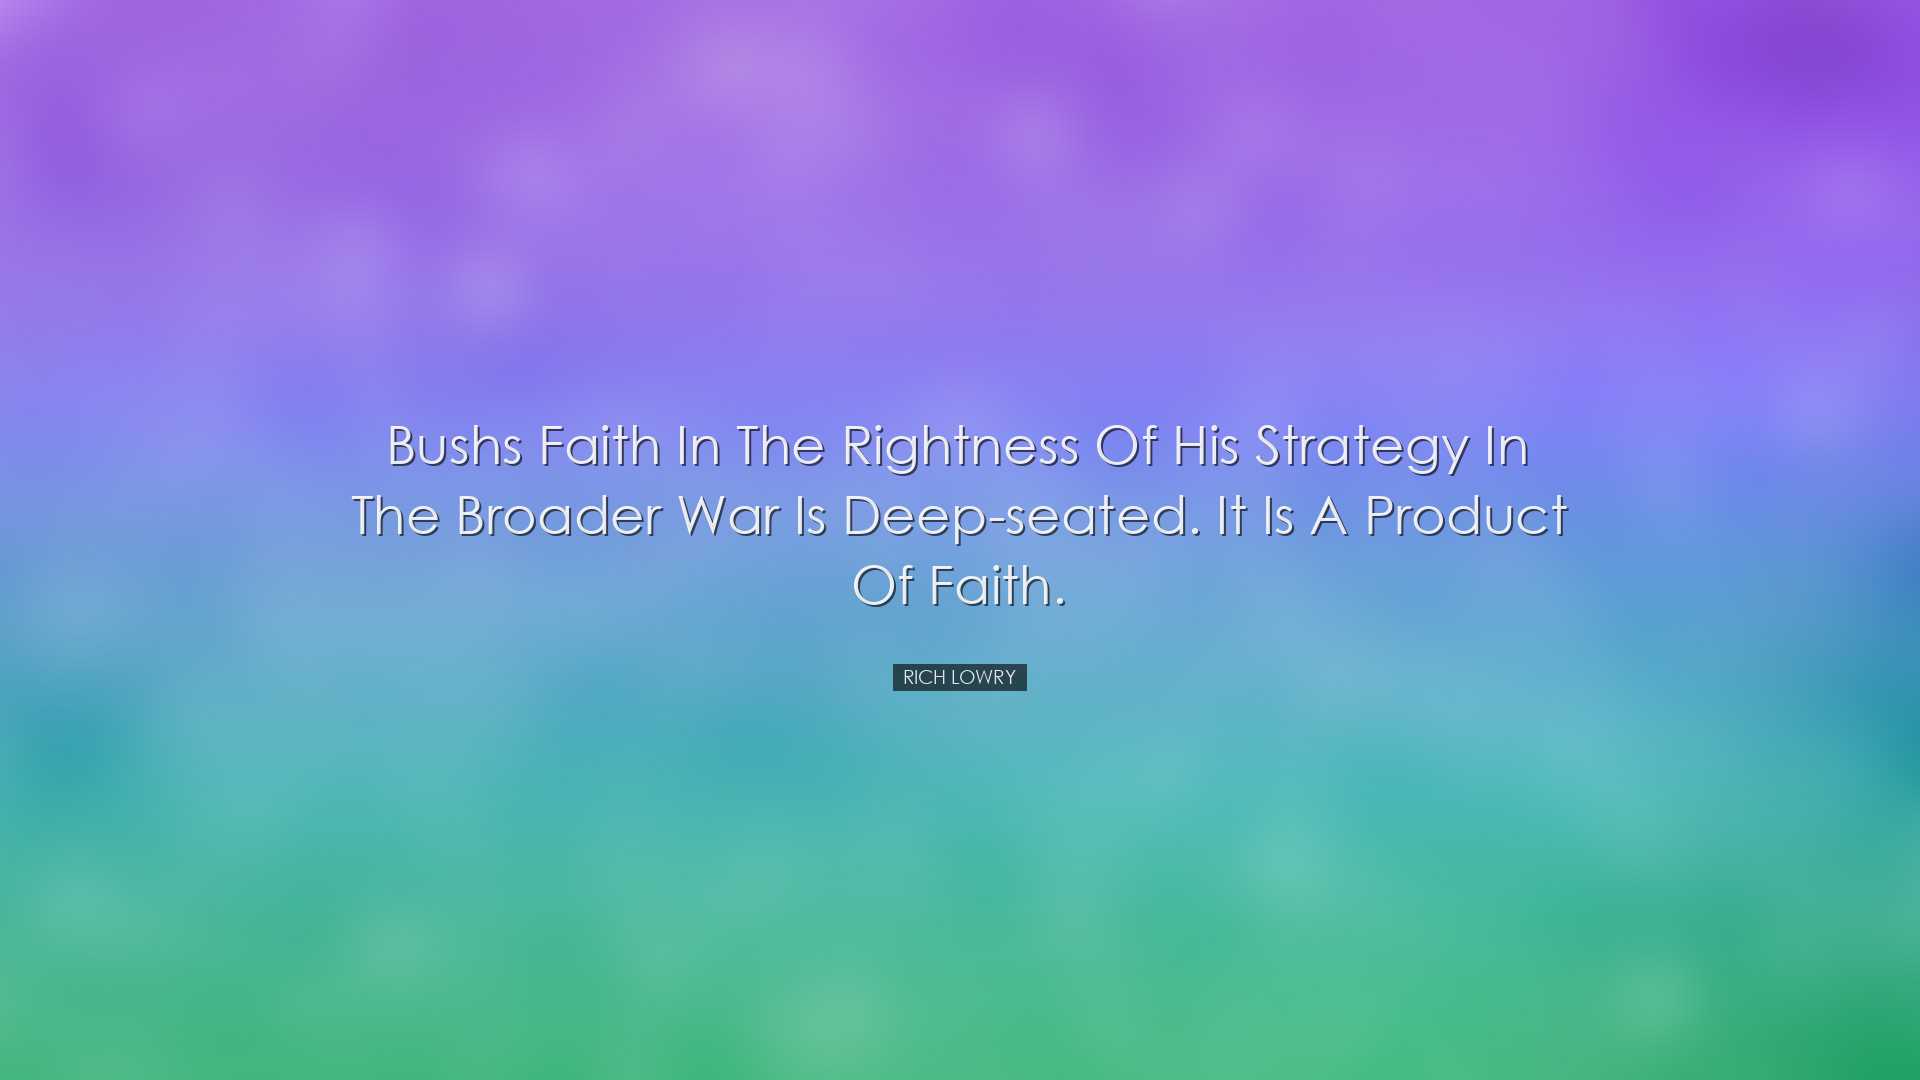 Bushs faith in the rightness of his strategy in the broader war is